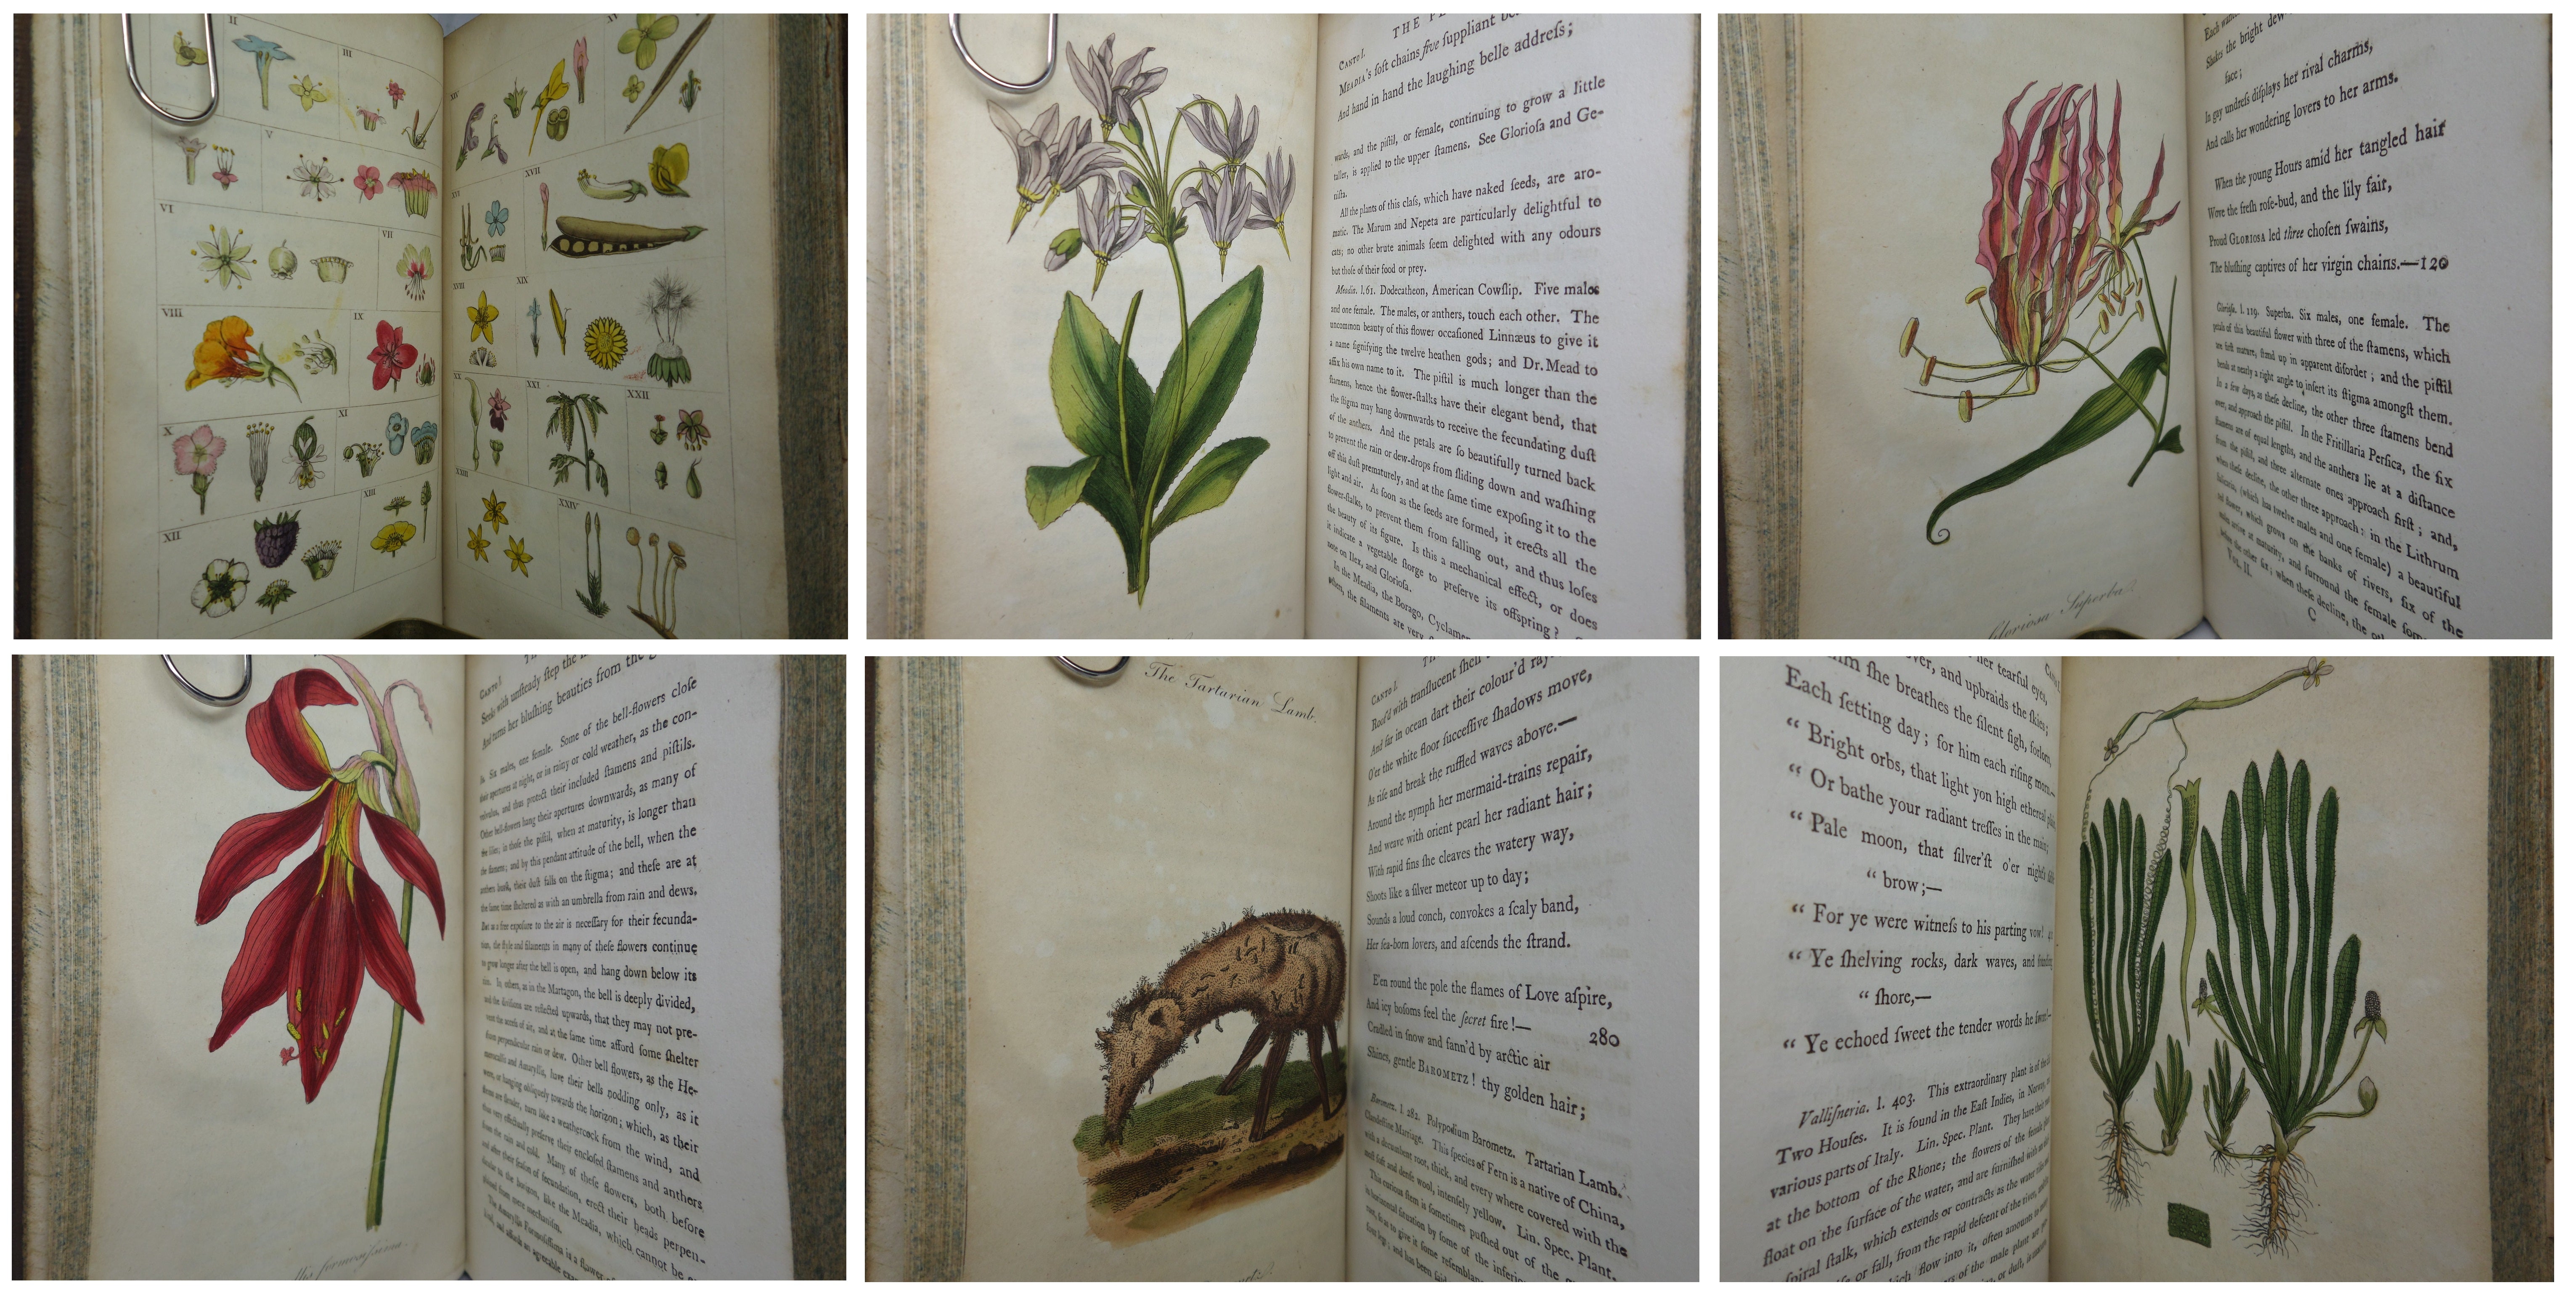 THE POETICAL WORKS OF ERASMUS DARWIN 1806 FIRST EDITION IN THREE VOLUMES, WILLIAM BLAKE ILLUSTRATIONS